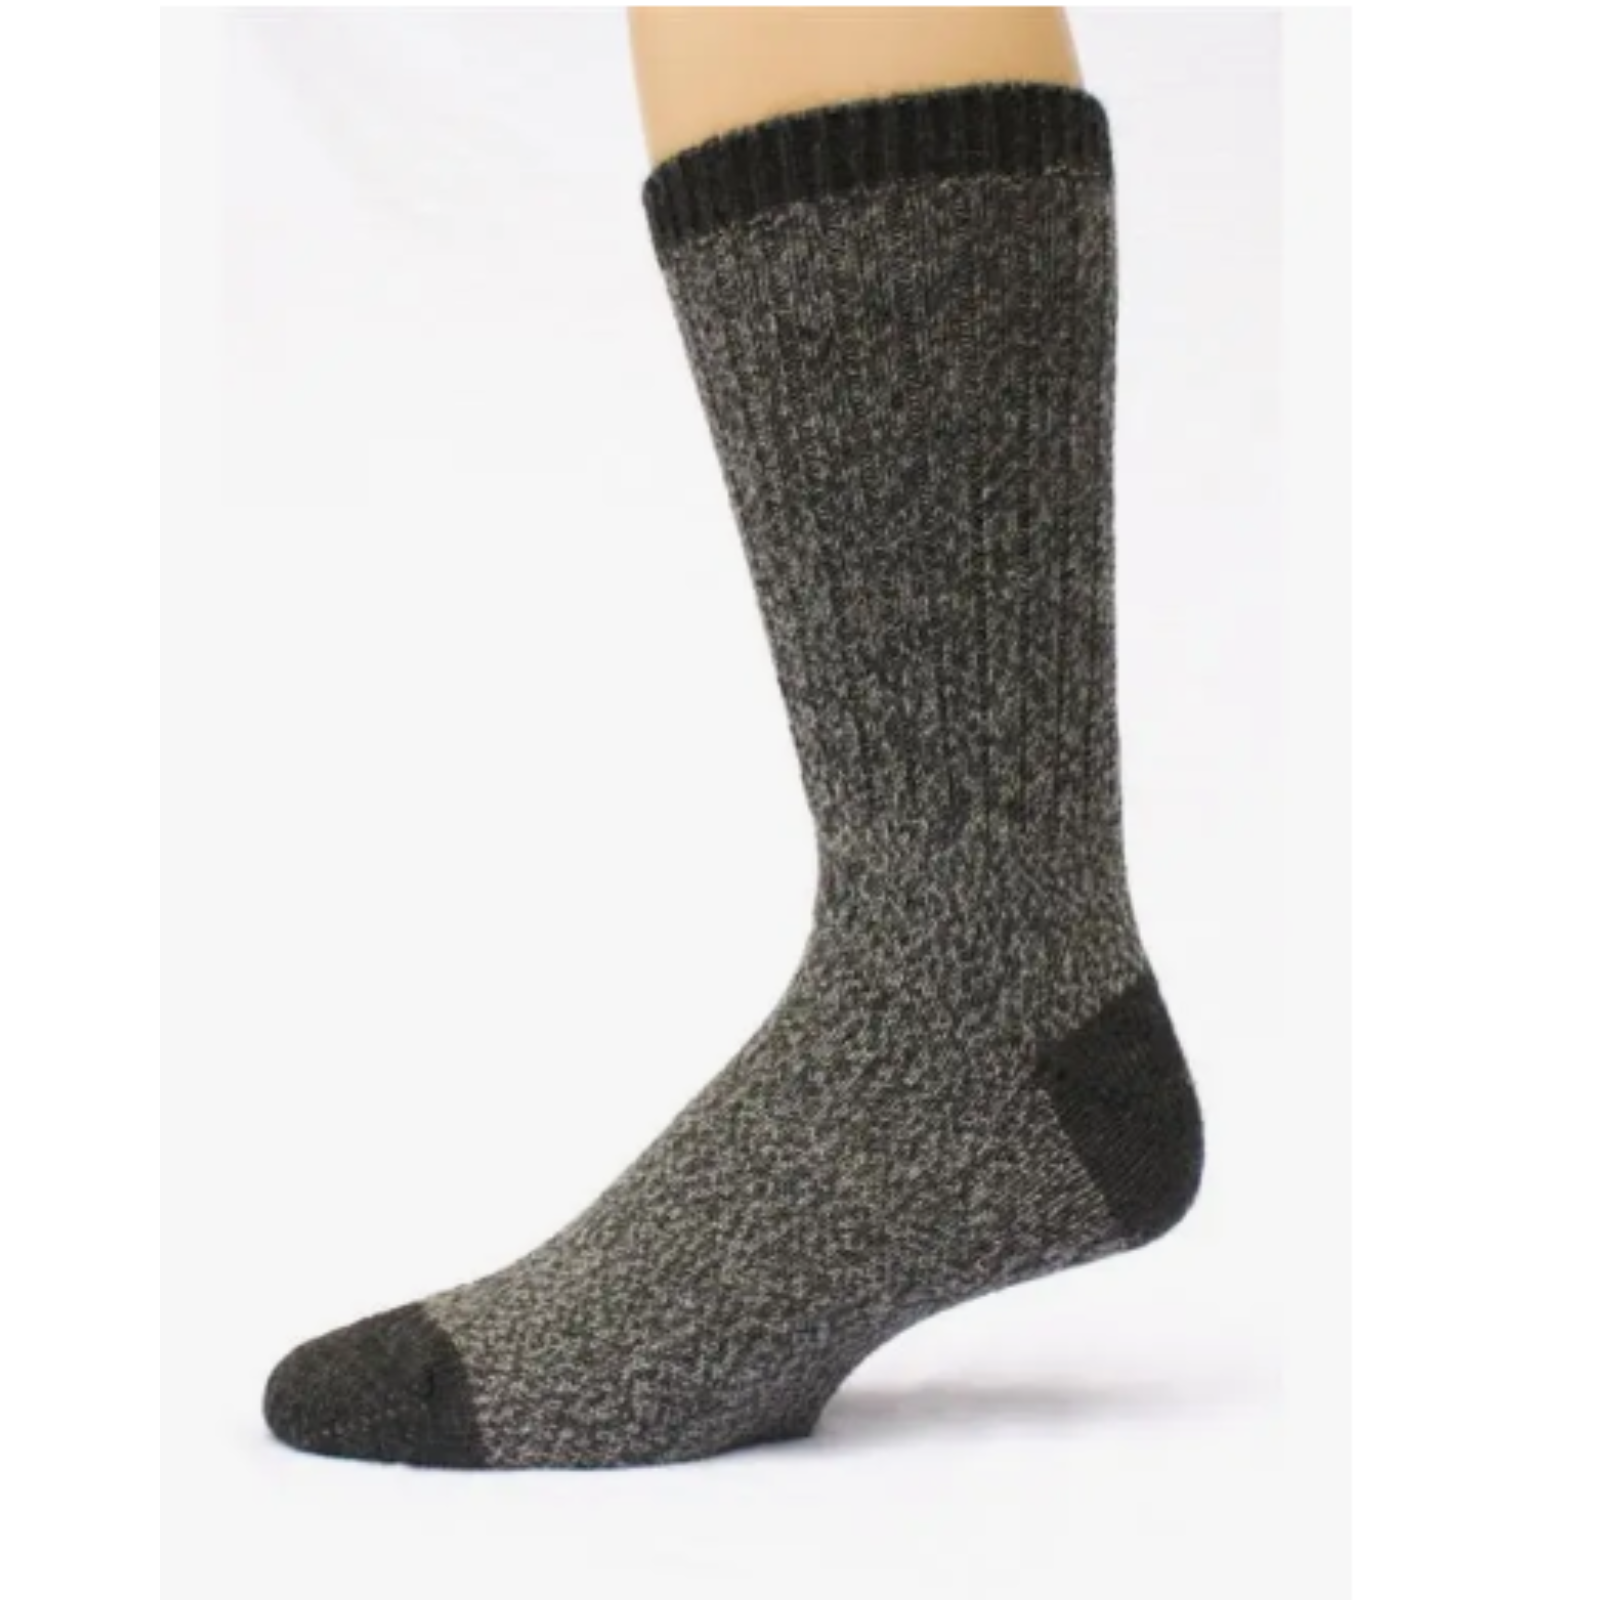 Choice Alpaca Products Boot women's and men's crew socks in Gray on display foot